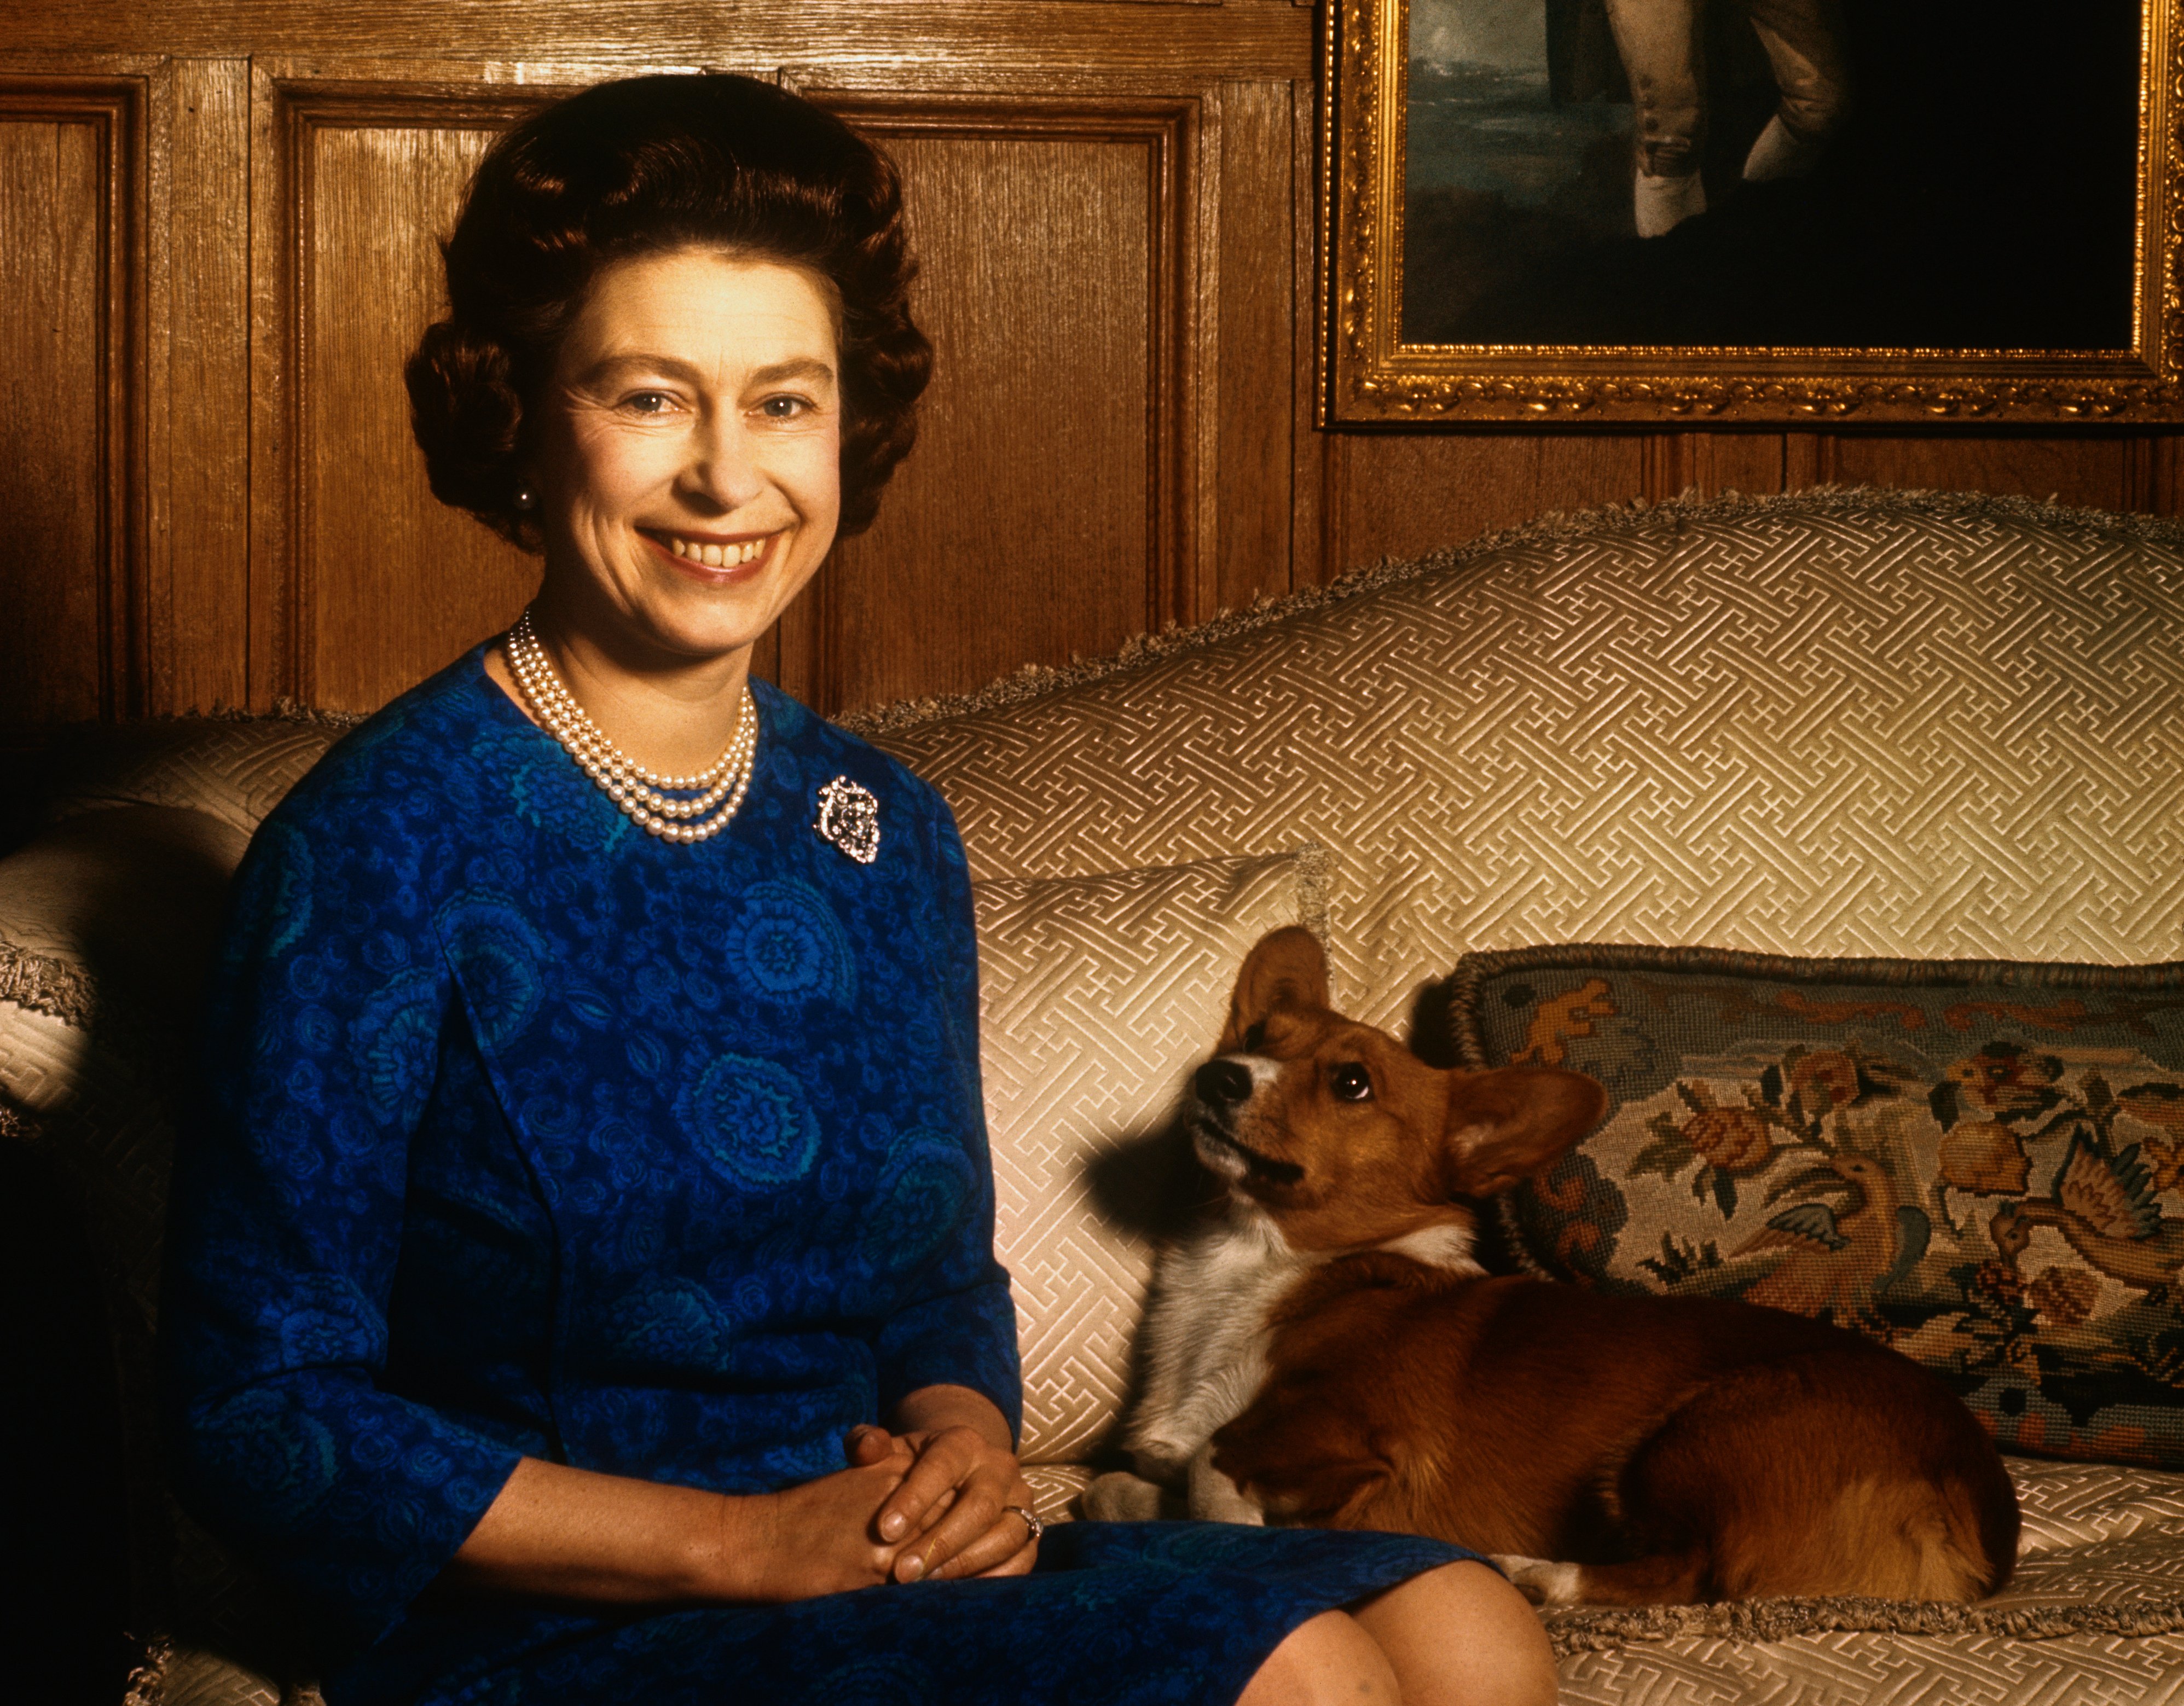 Queen Elizabeth II pictured alongside her pet dog during a picture-taking session in the salon at Sandringham House. | Source: Getty Images